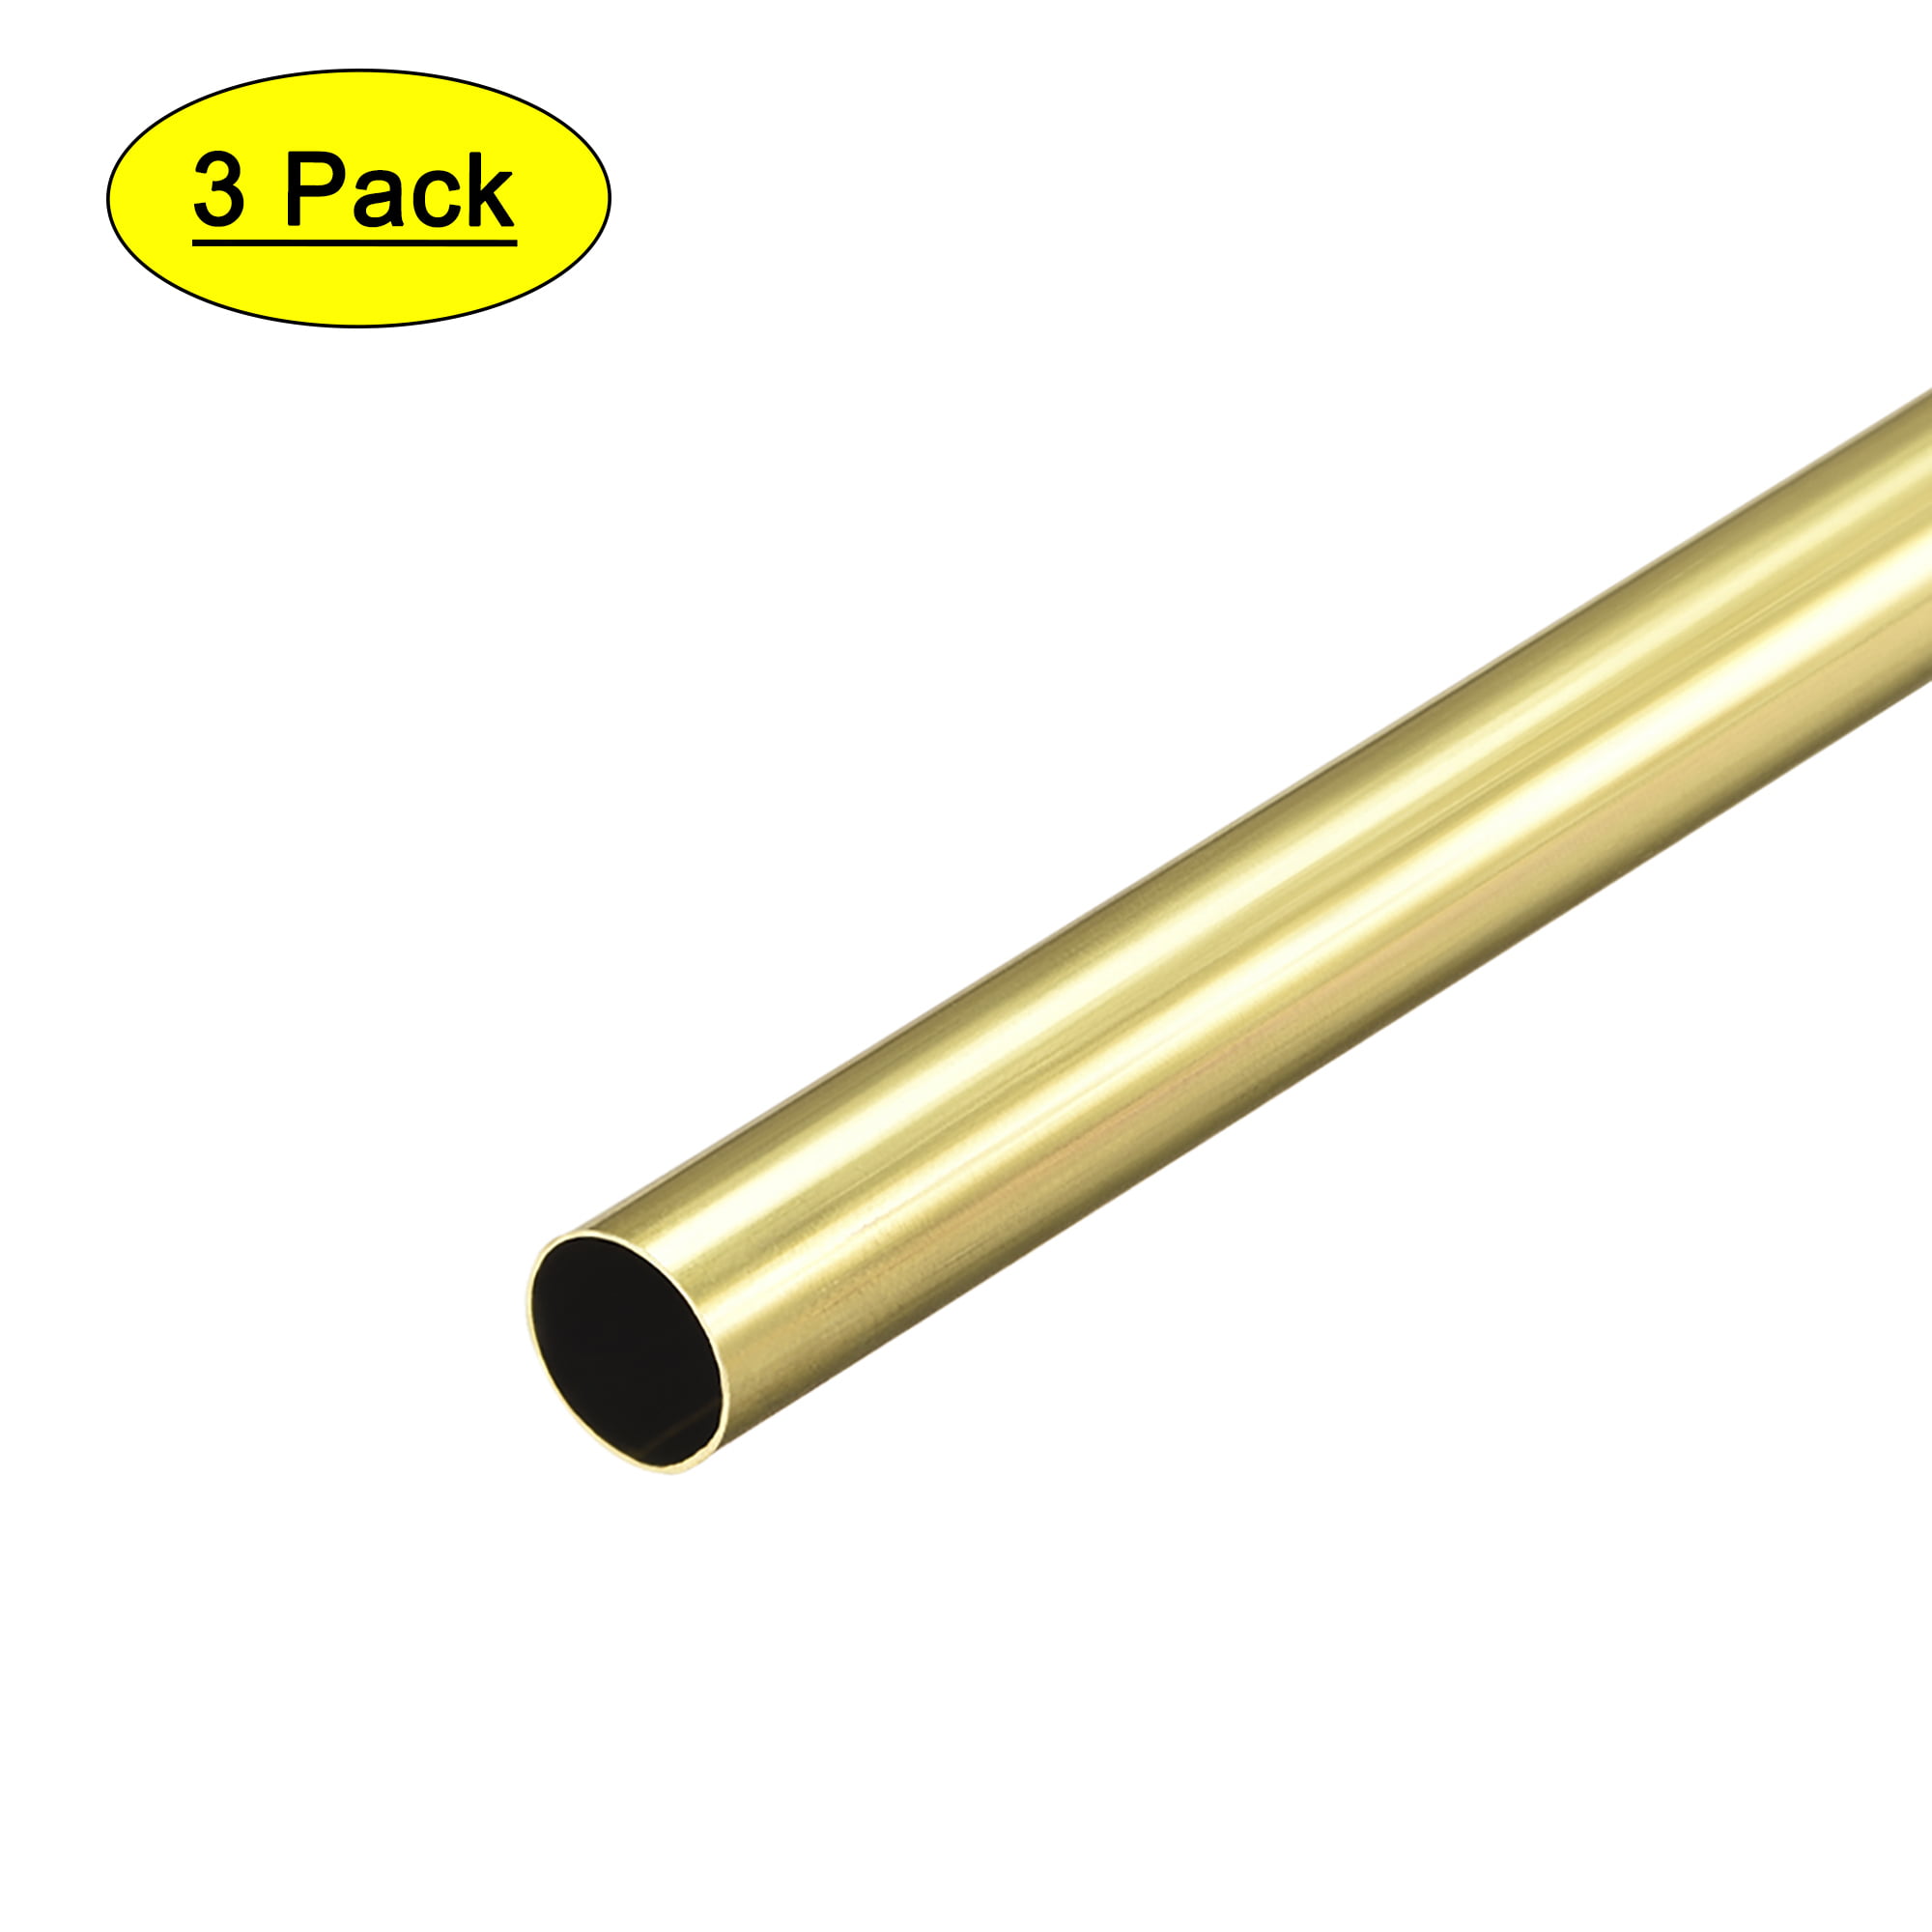 uxcell 0.2mm x 0.8mm x 500mm Brass Pipe Tube Round Bar Rod for RC Boat 